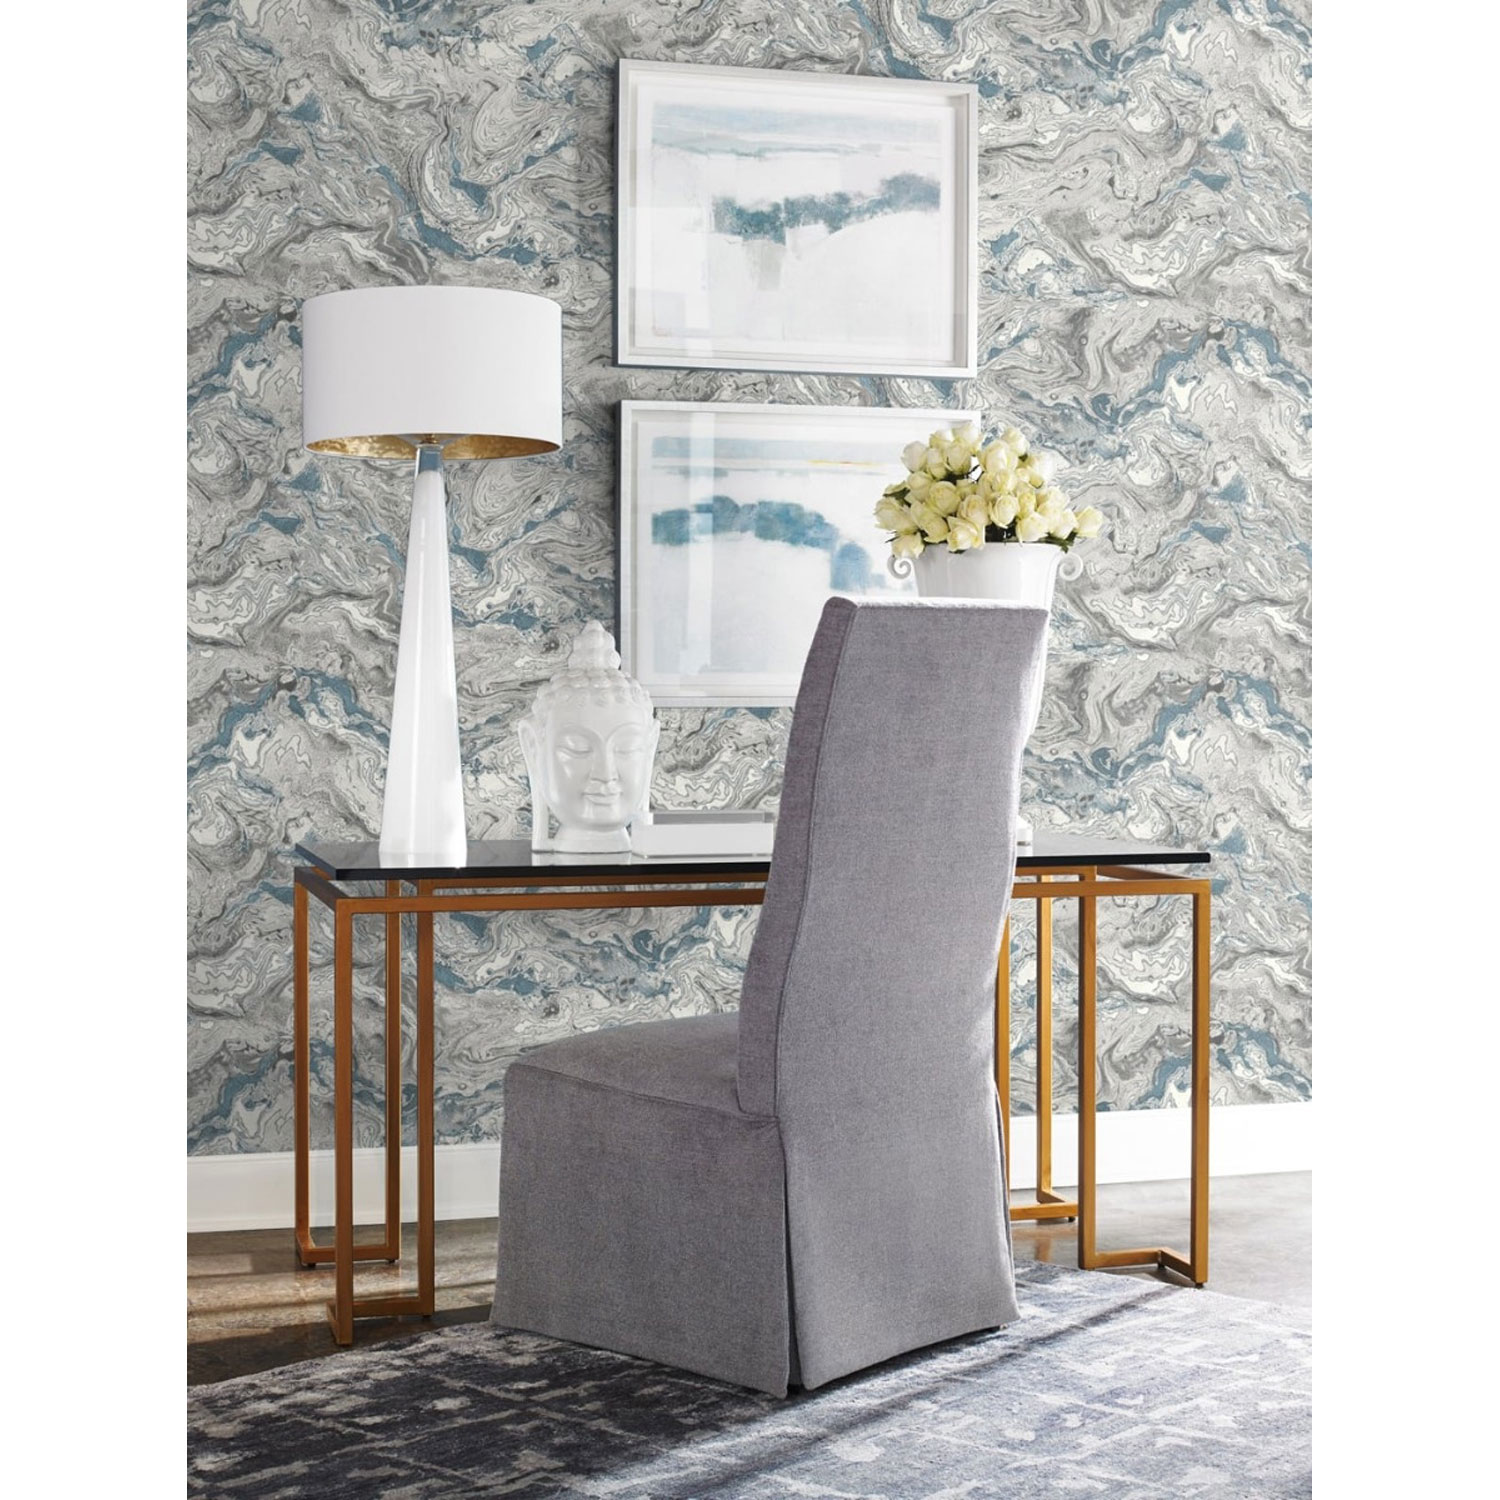 Lillian August Luxe Haven Blue Faux Marble Peel And Stick Wallpaper